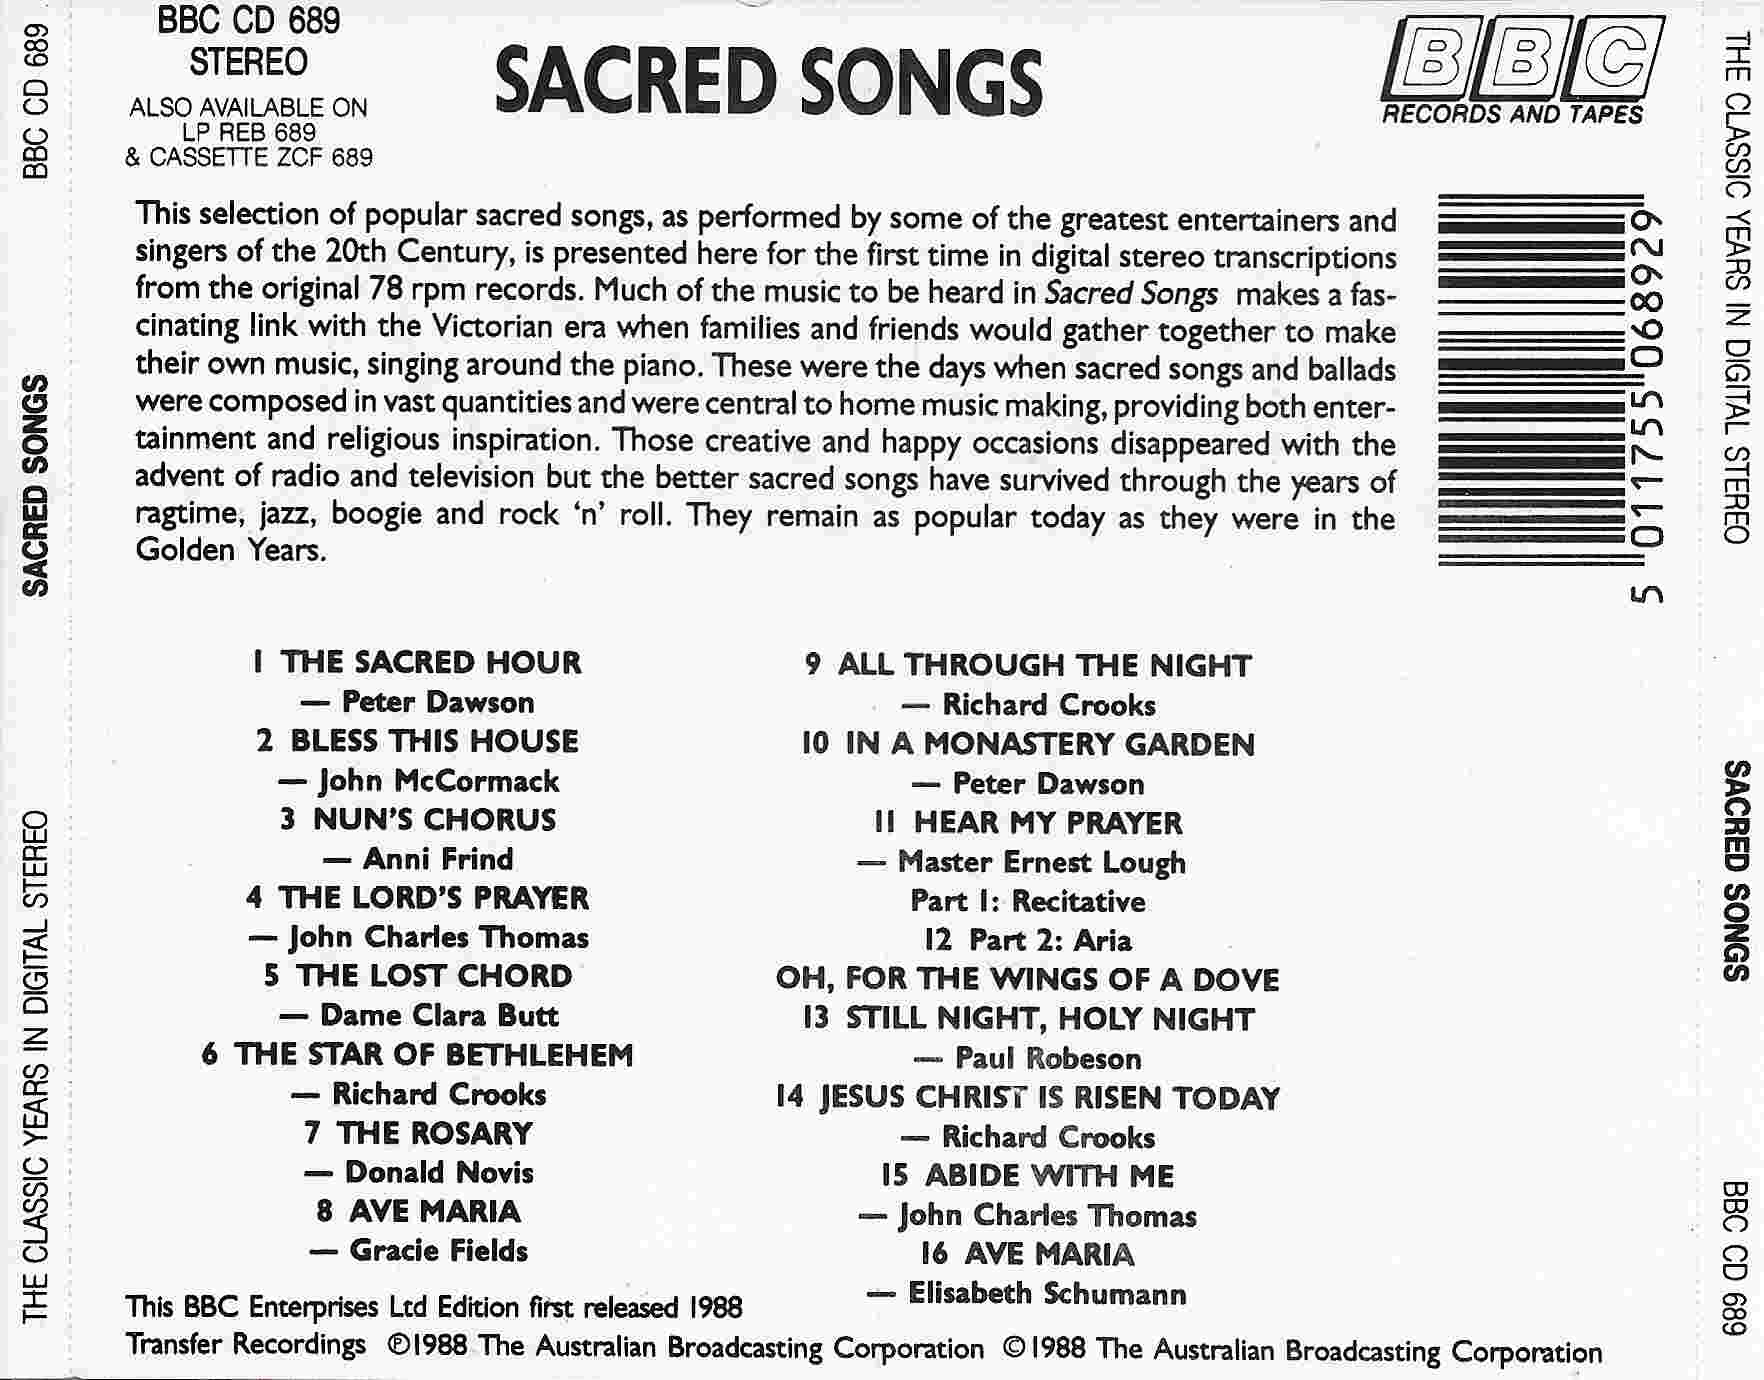 Picture of BBCCD689 Songs for a sacred season by artist Unknown from the BBC records and Tapes library